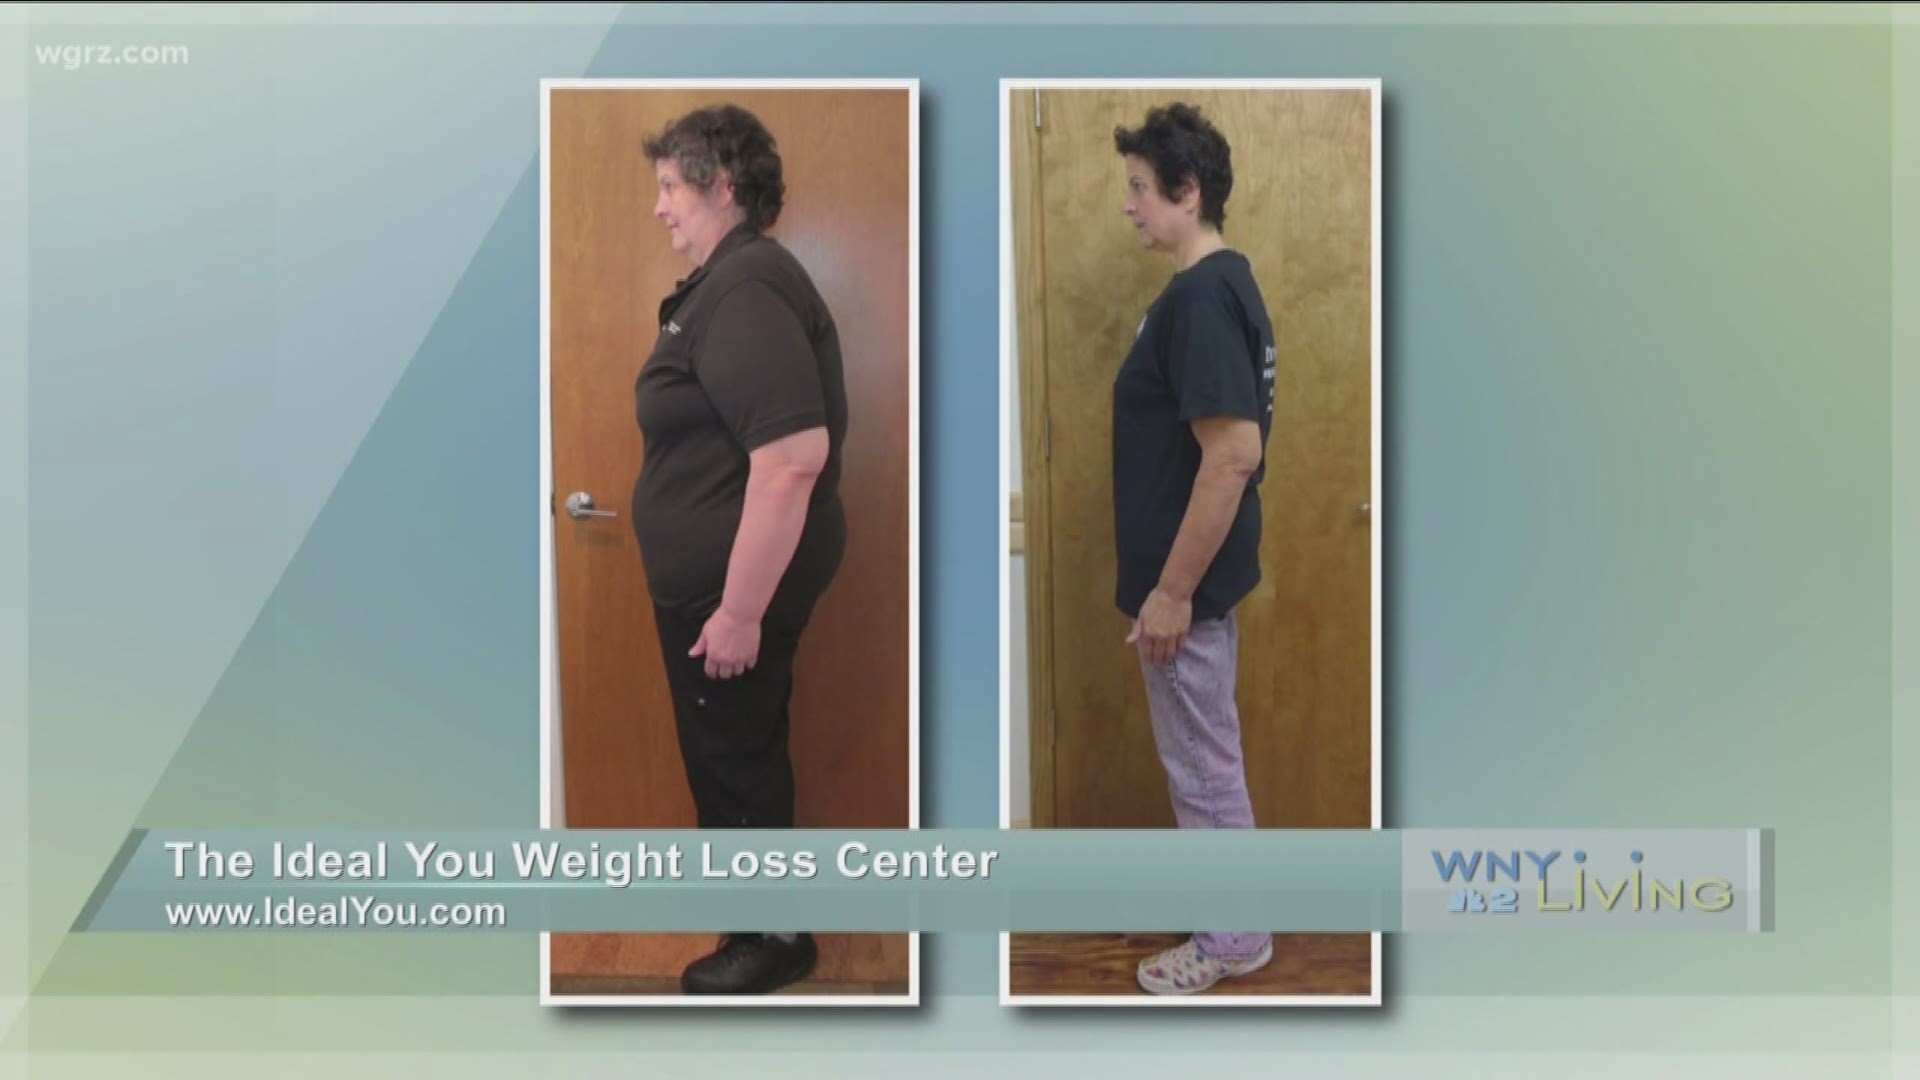 WNY Living - March 16 - The Ideal You Weight Loss Center (SPONSORED CONTENT)